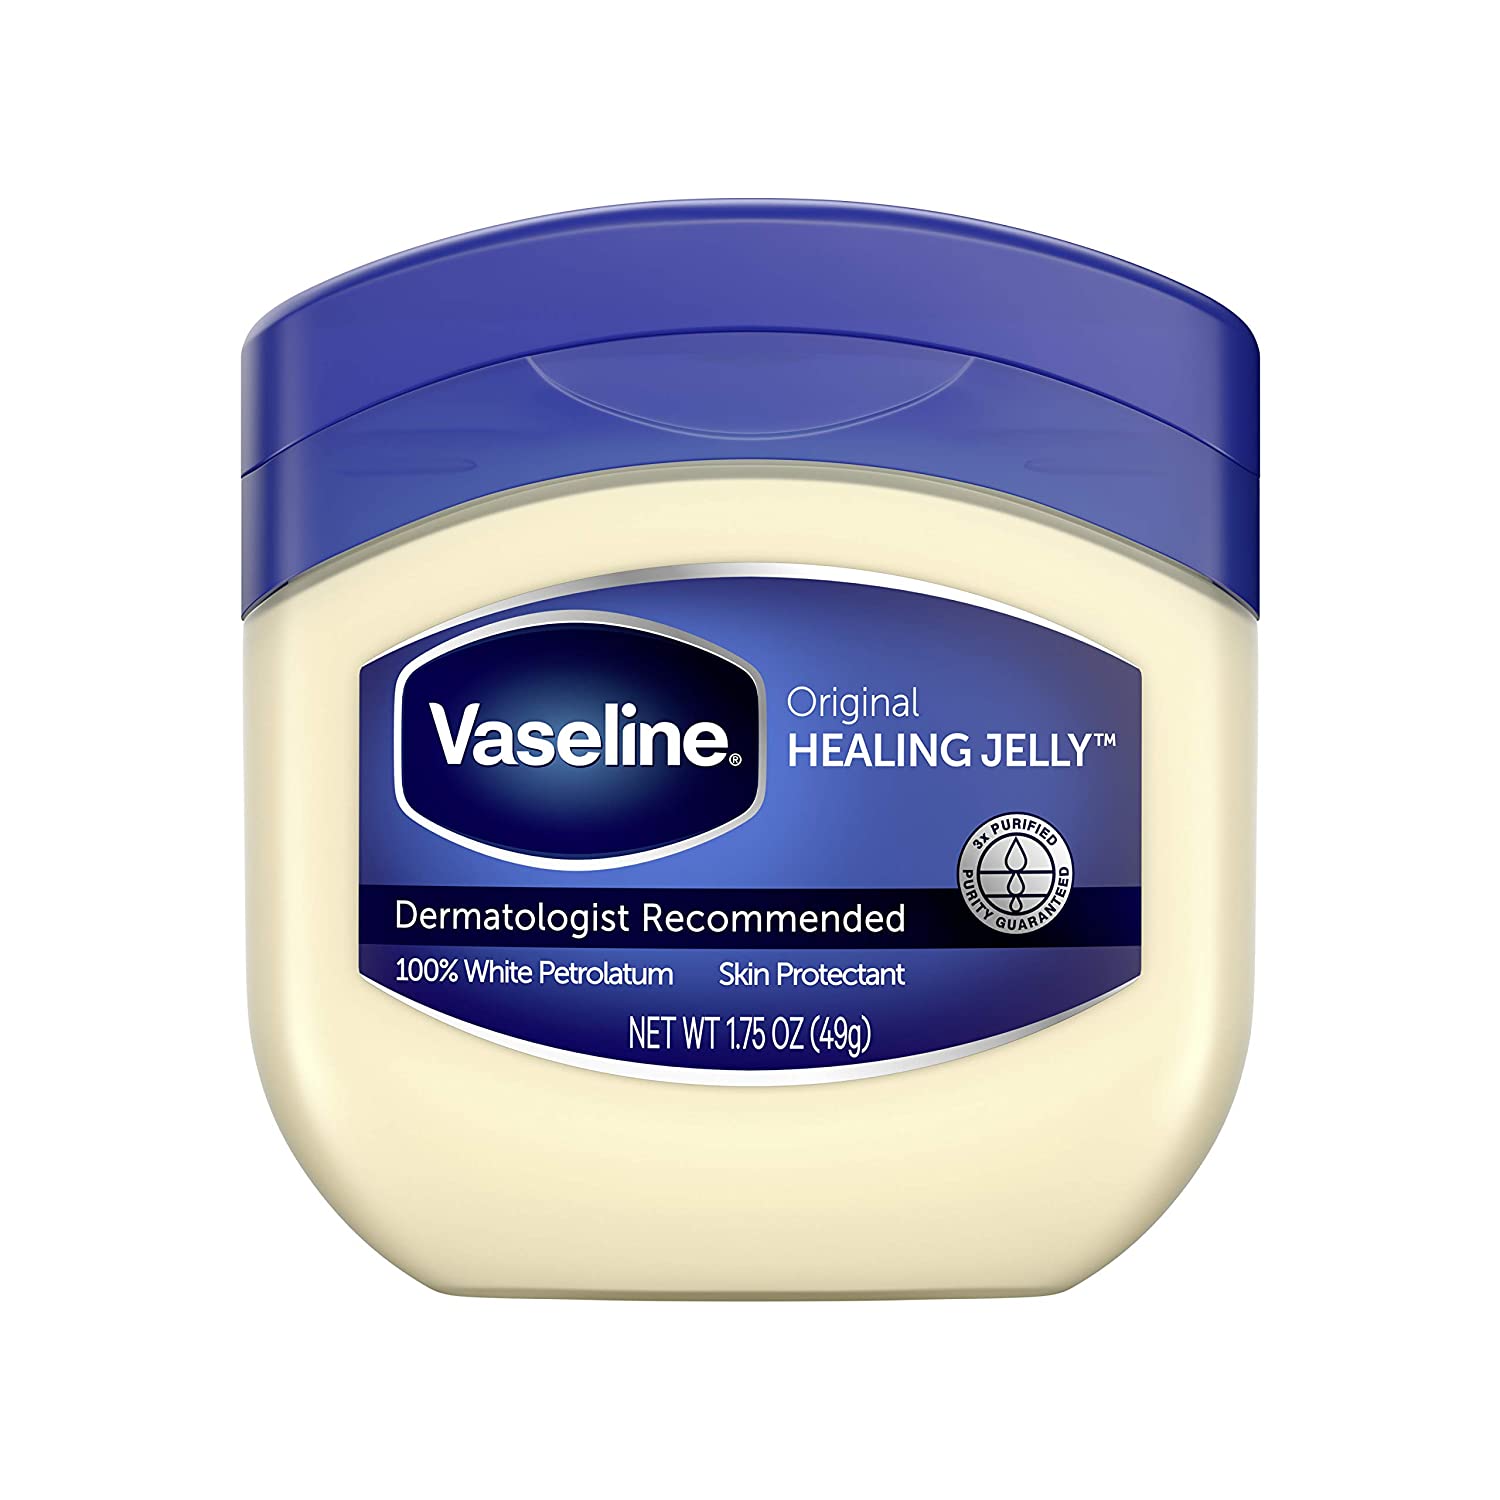 Vaseline Healing Jelly For Dry Skin and Eczema Relief Original 100% Pure Petroleum Jelly 1.75 oz, Size: 1.7 oz, Blue